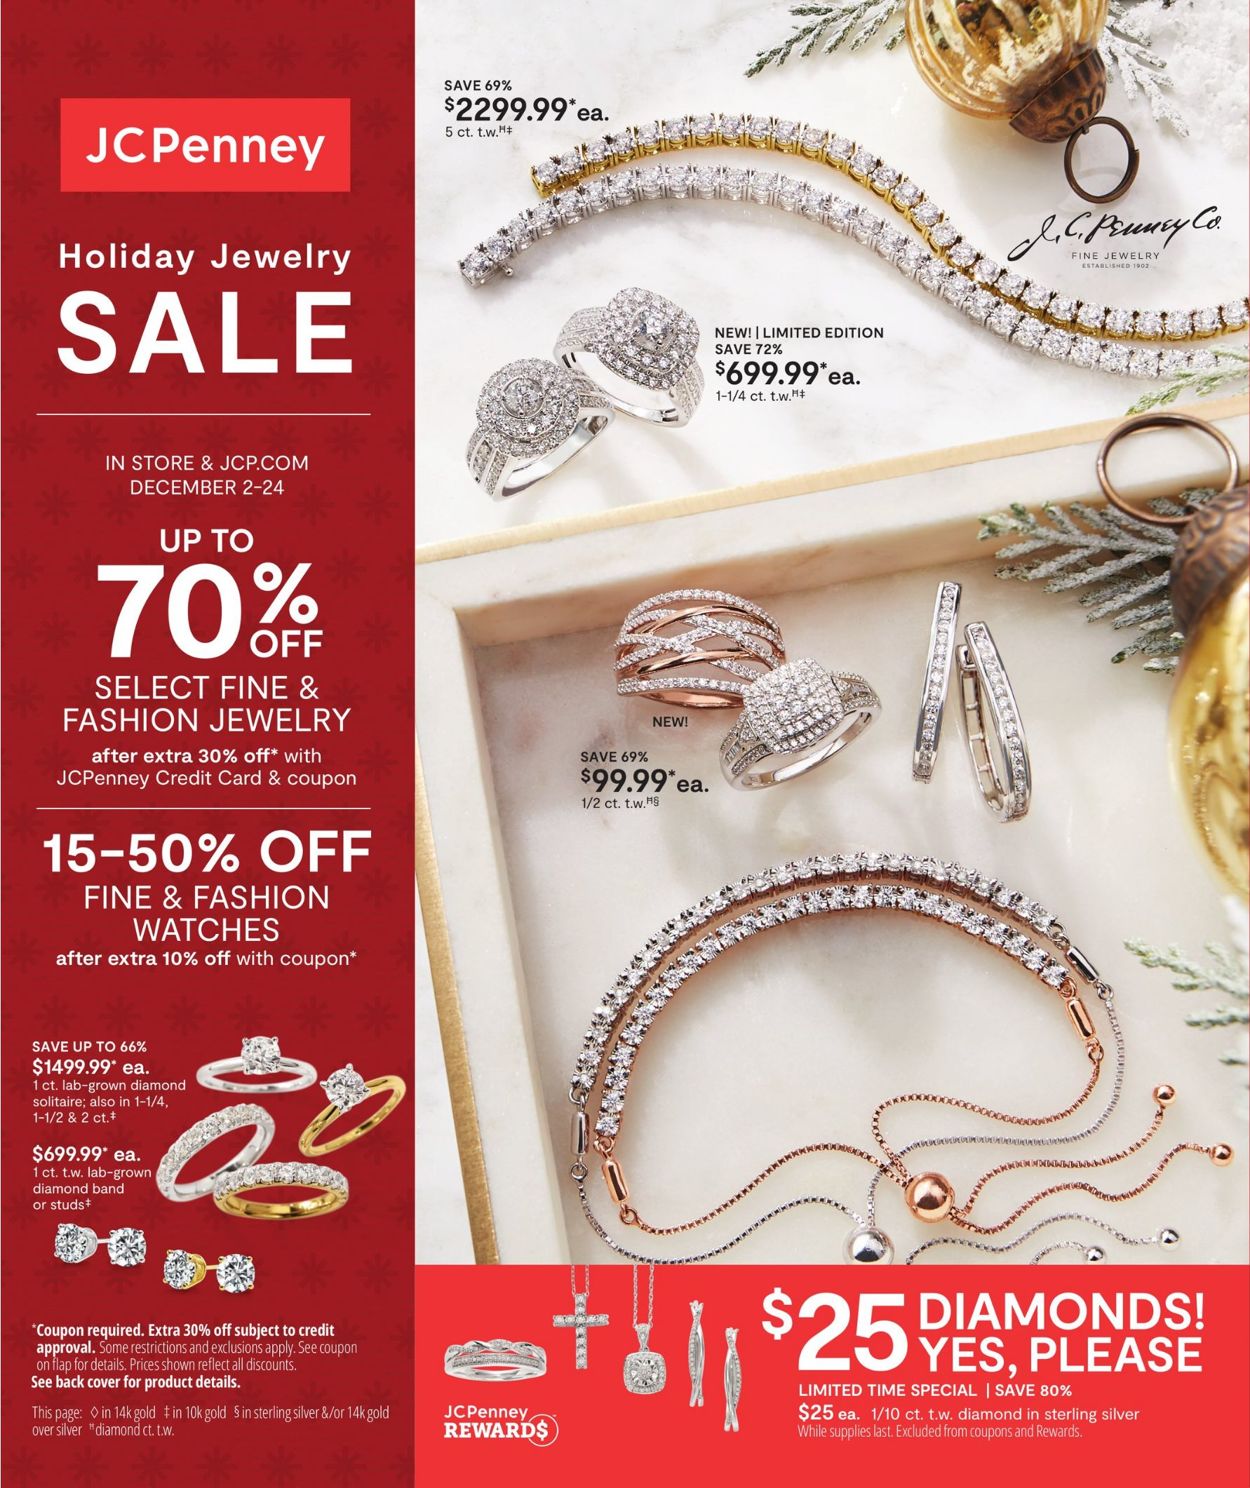 JCPenney Holiday Jewelry Sale 2020 Weekly Ad Circular - valid 12/02-12/24/2020